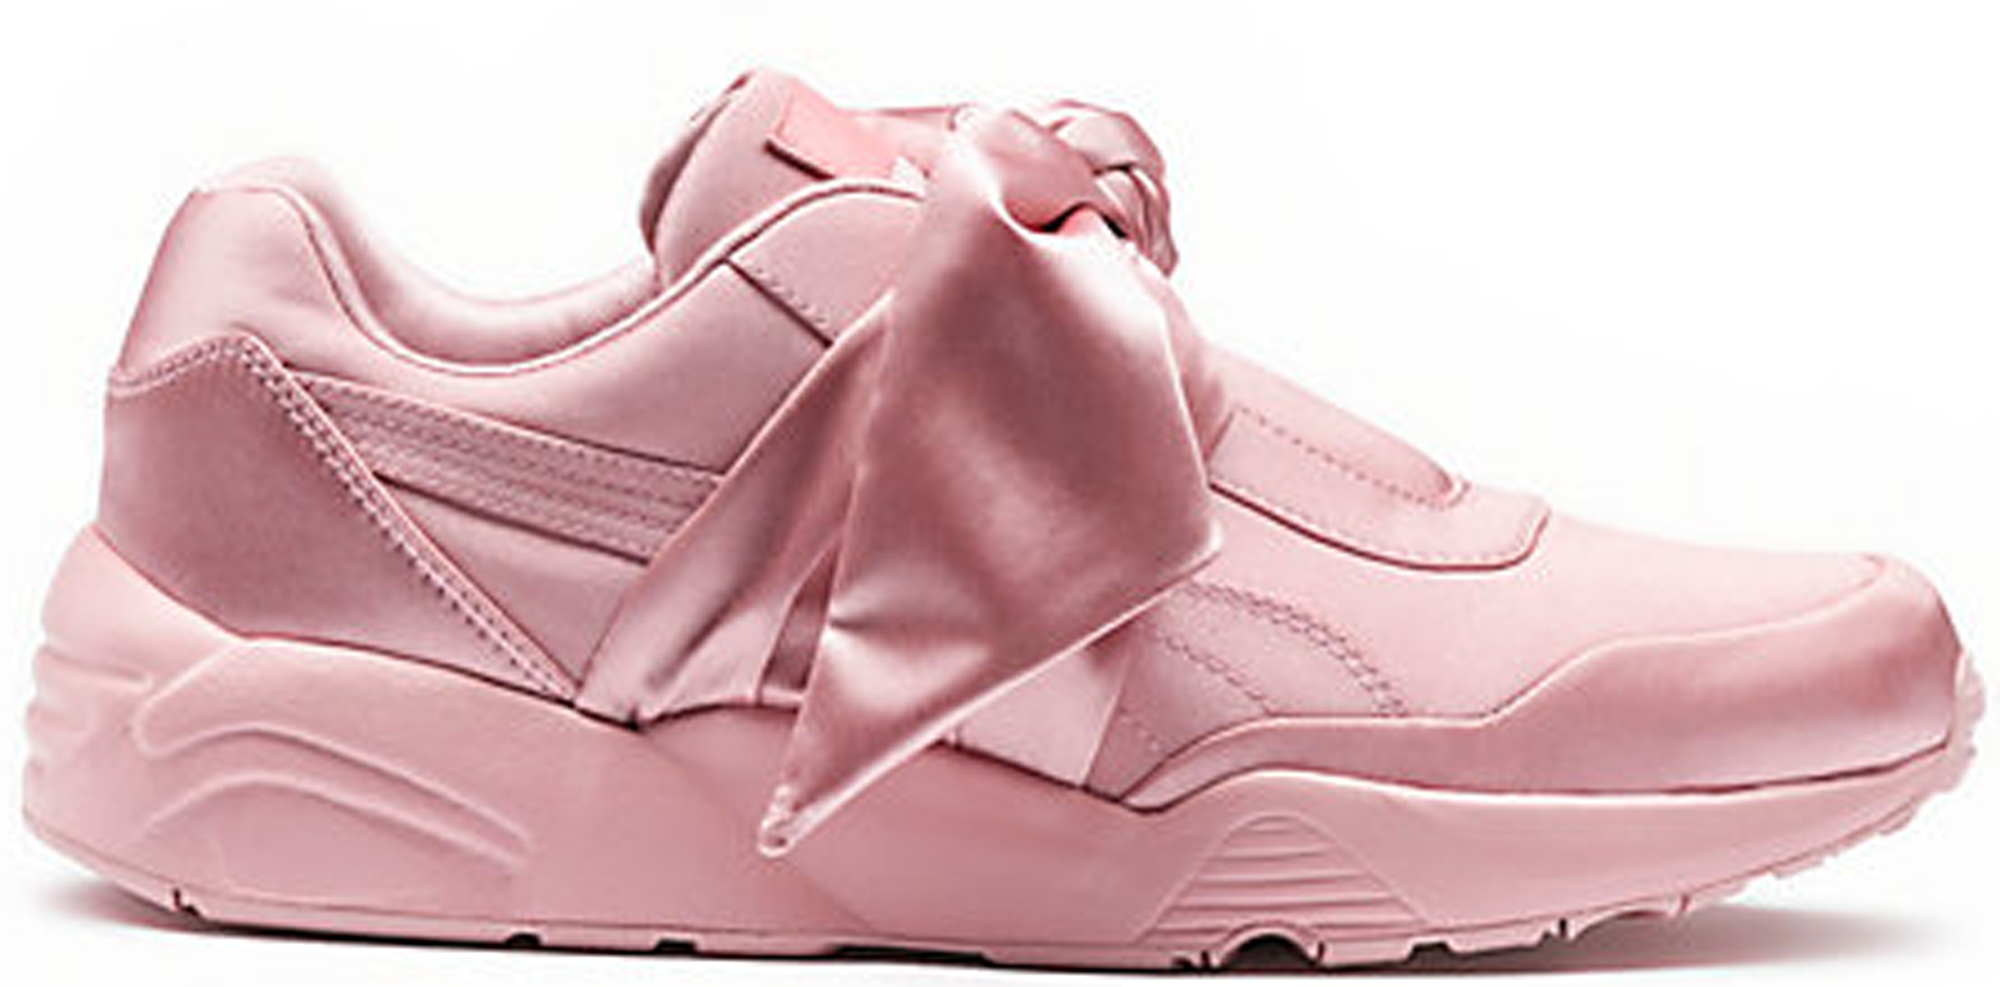 pink pumas with bow